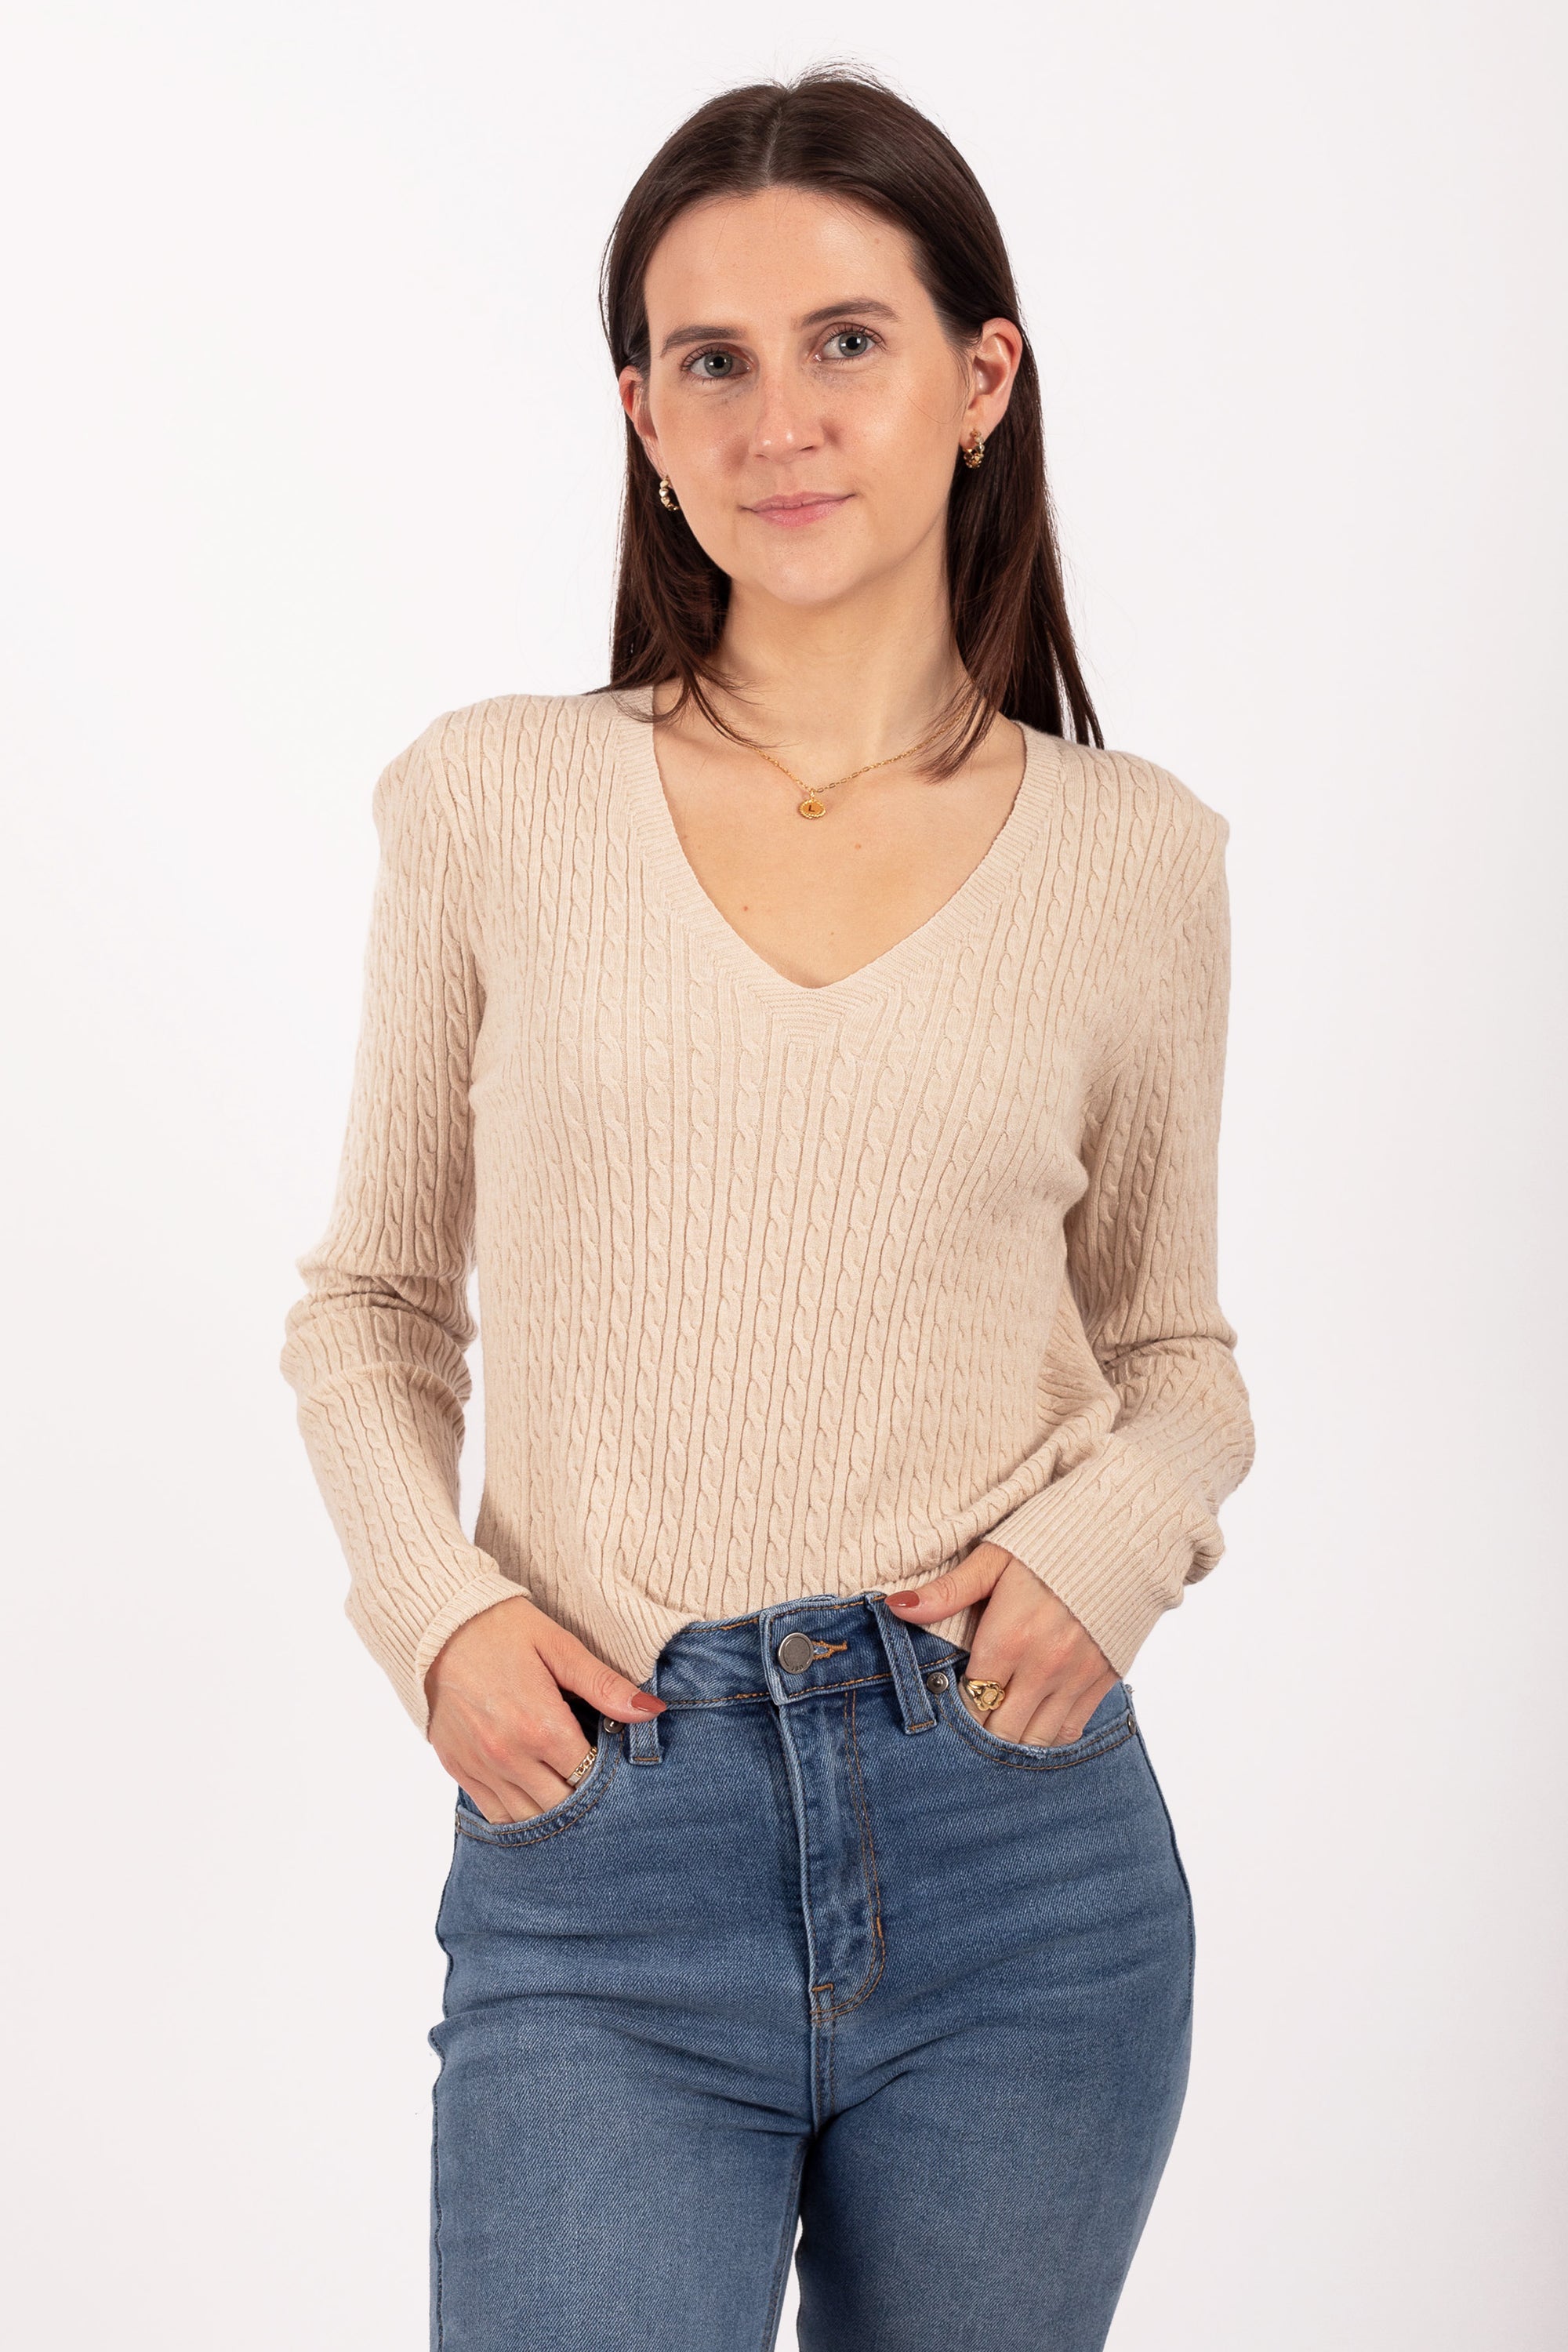 Tan Cable Knit Sweater Top - FINAL SALE